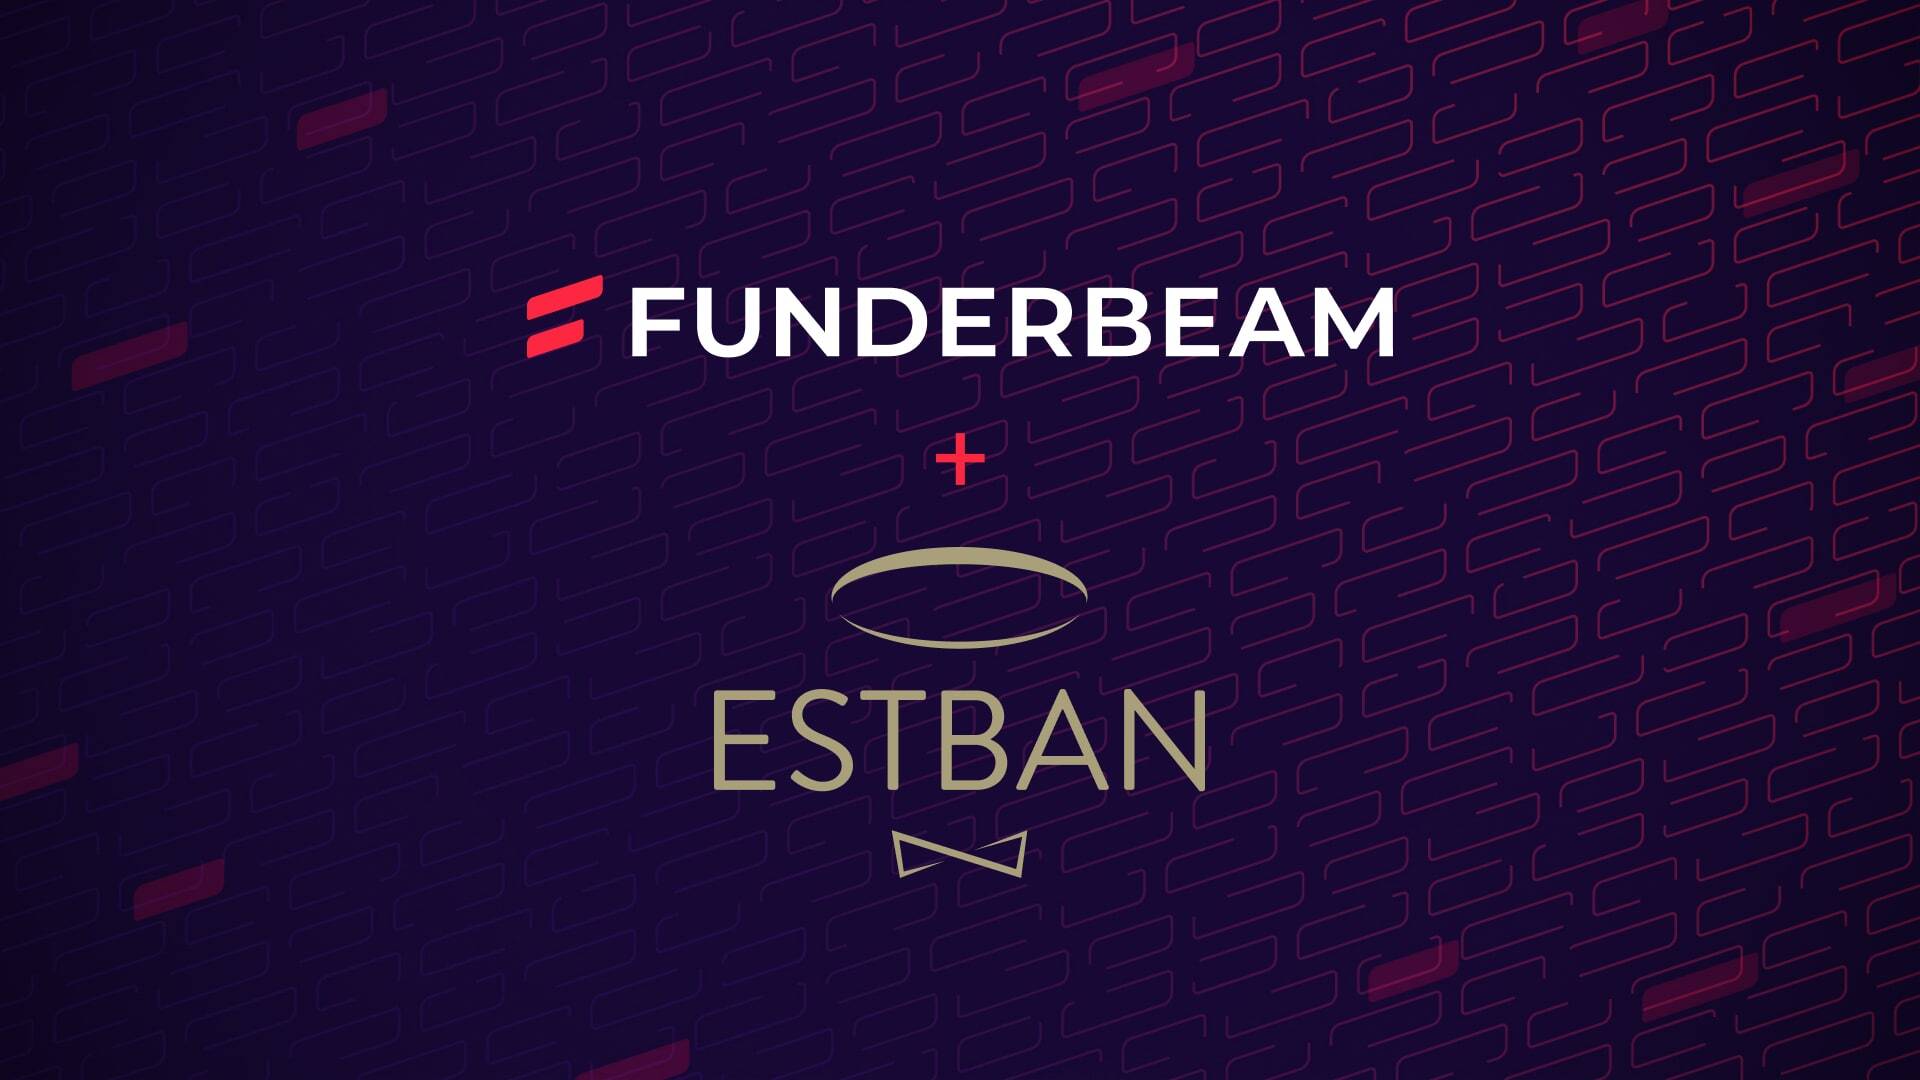 Funderbeam and EstBAN sign a cooperation agreement